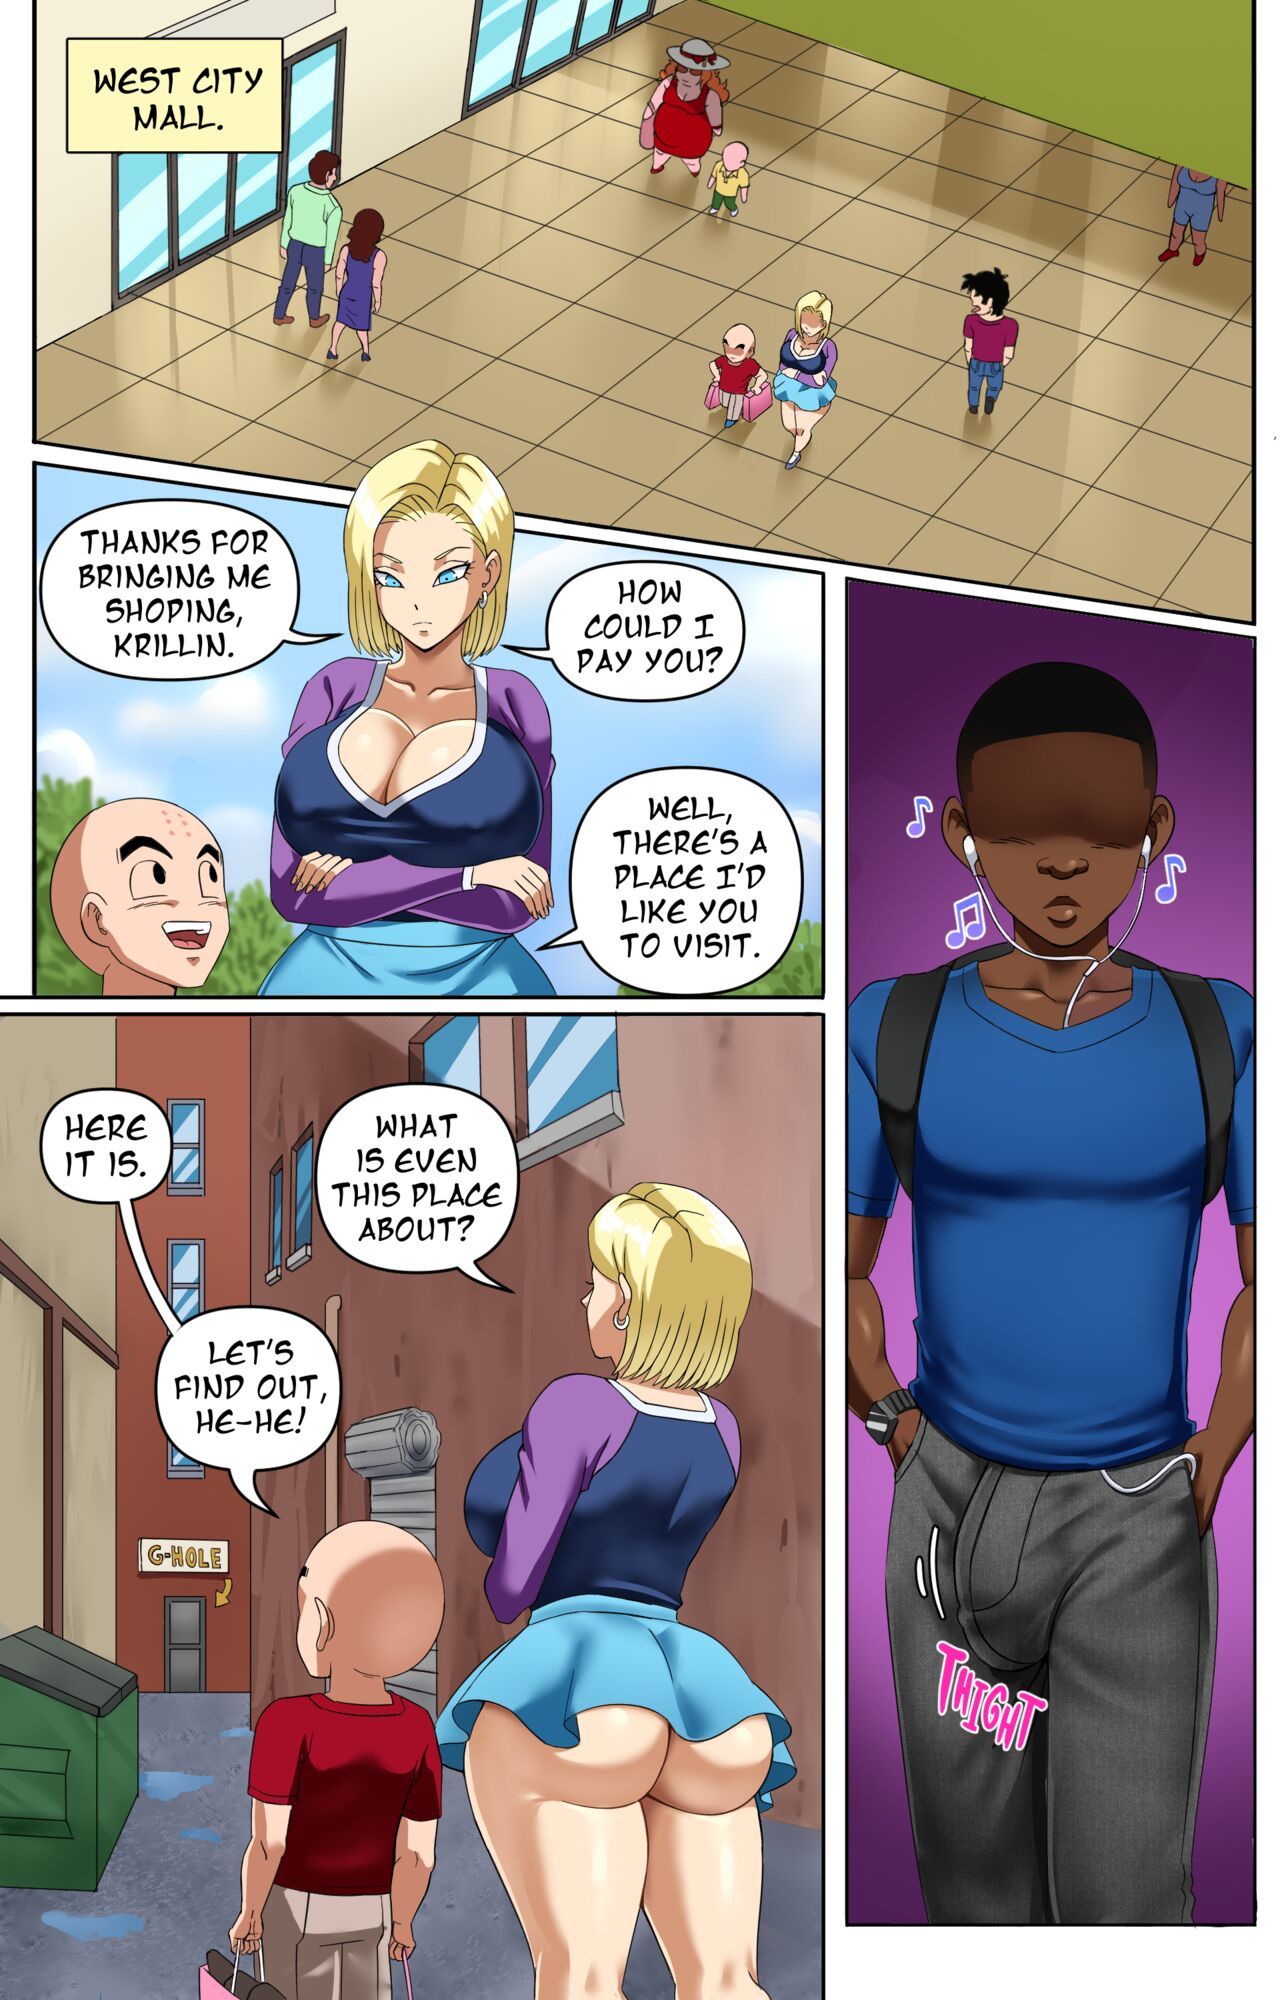 Android 18 NTR Part 4 Porn Comic english 01